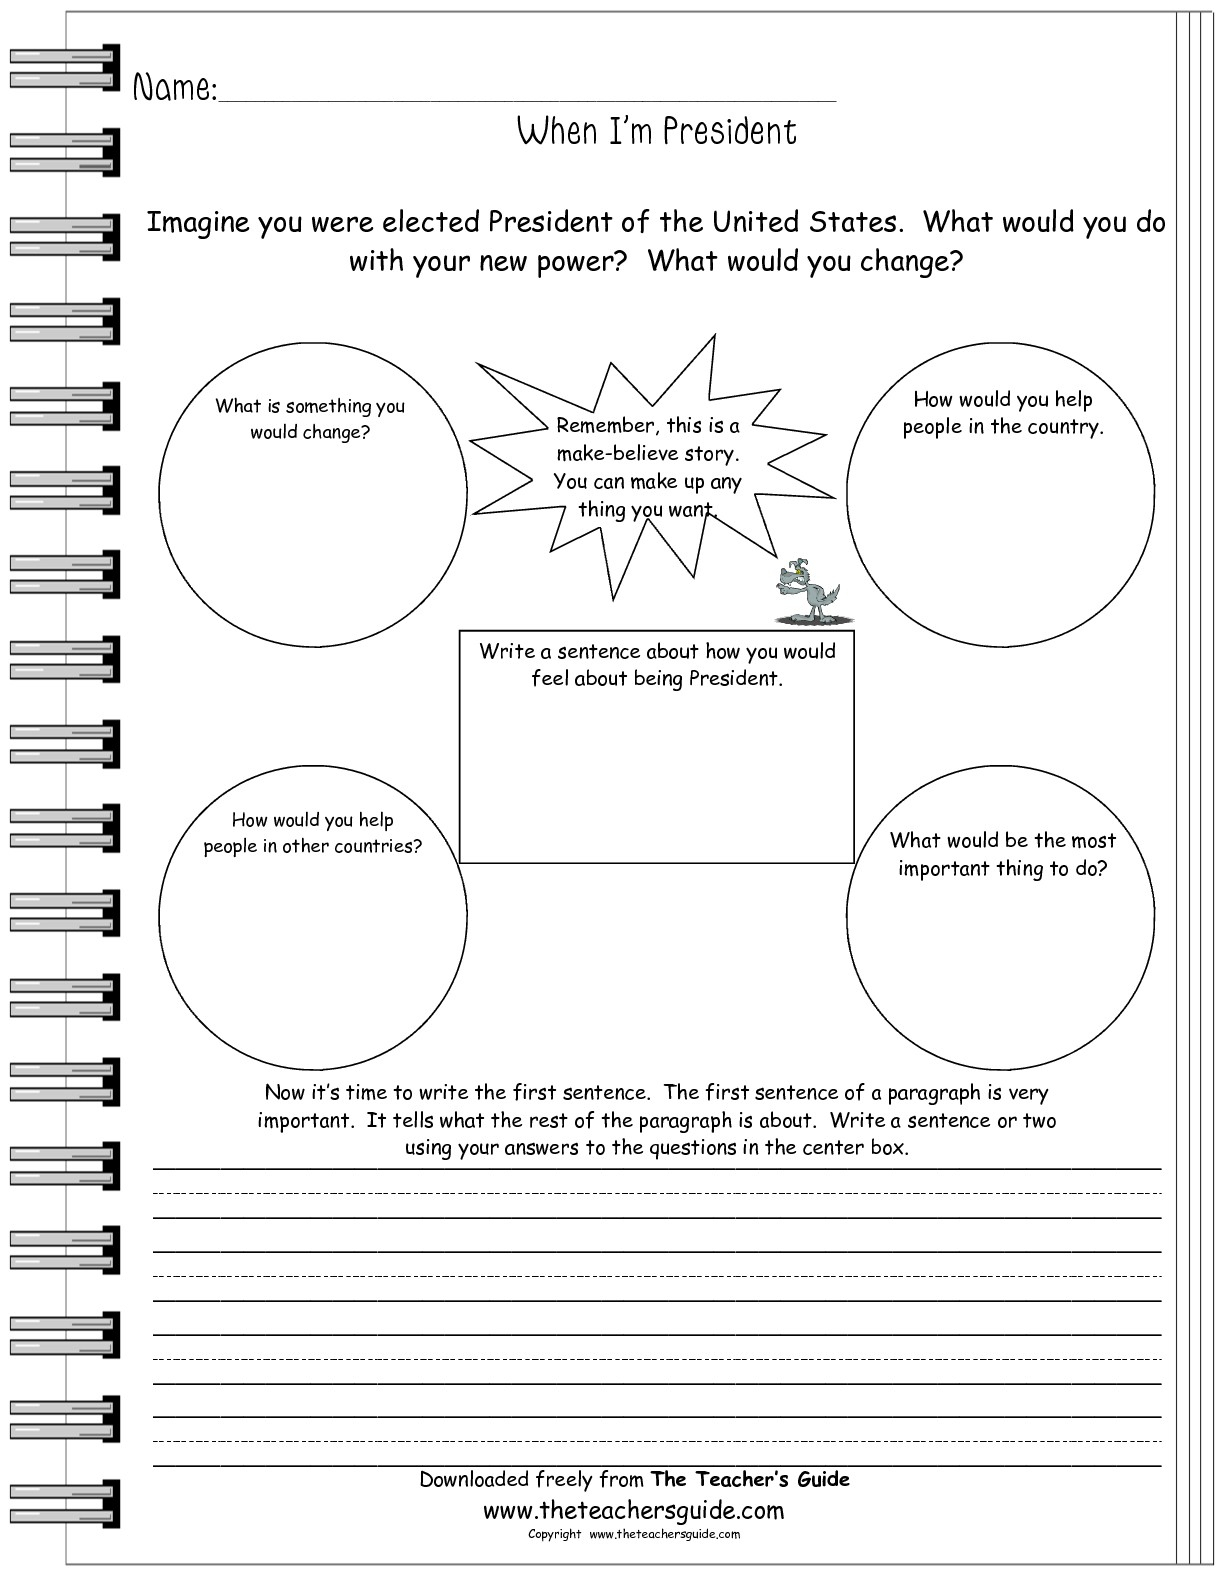 Writing Prompt Worksheets From The Teacher&amp;#039;s Guide | If I Were President Printable Worksheet